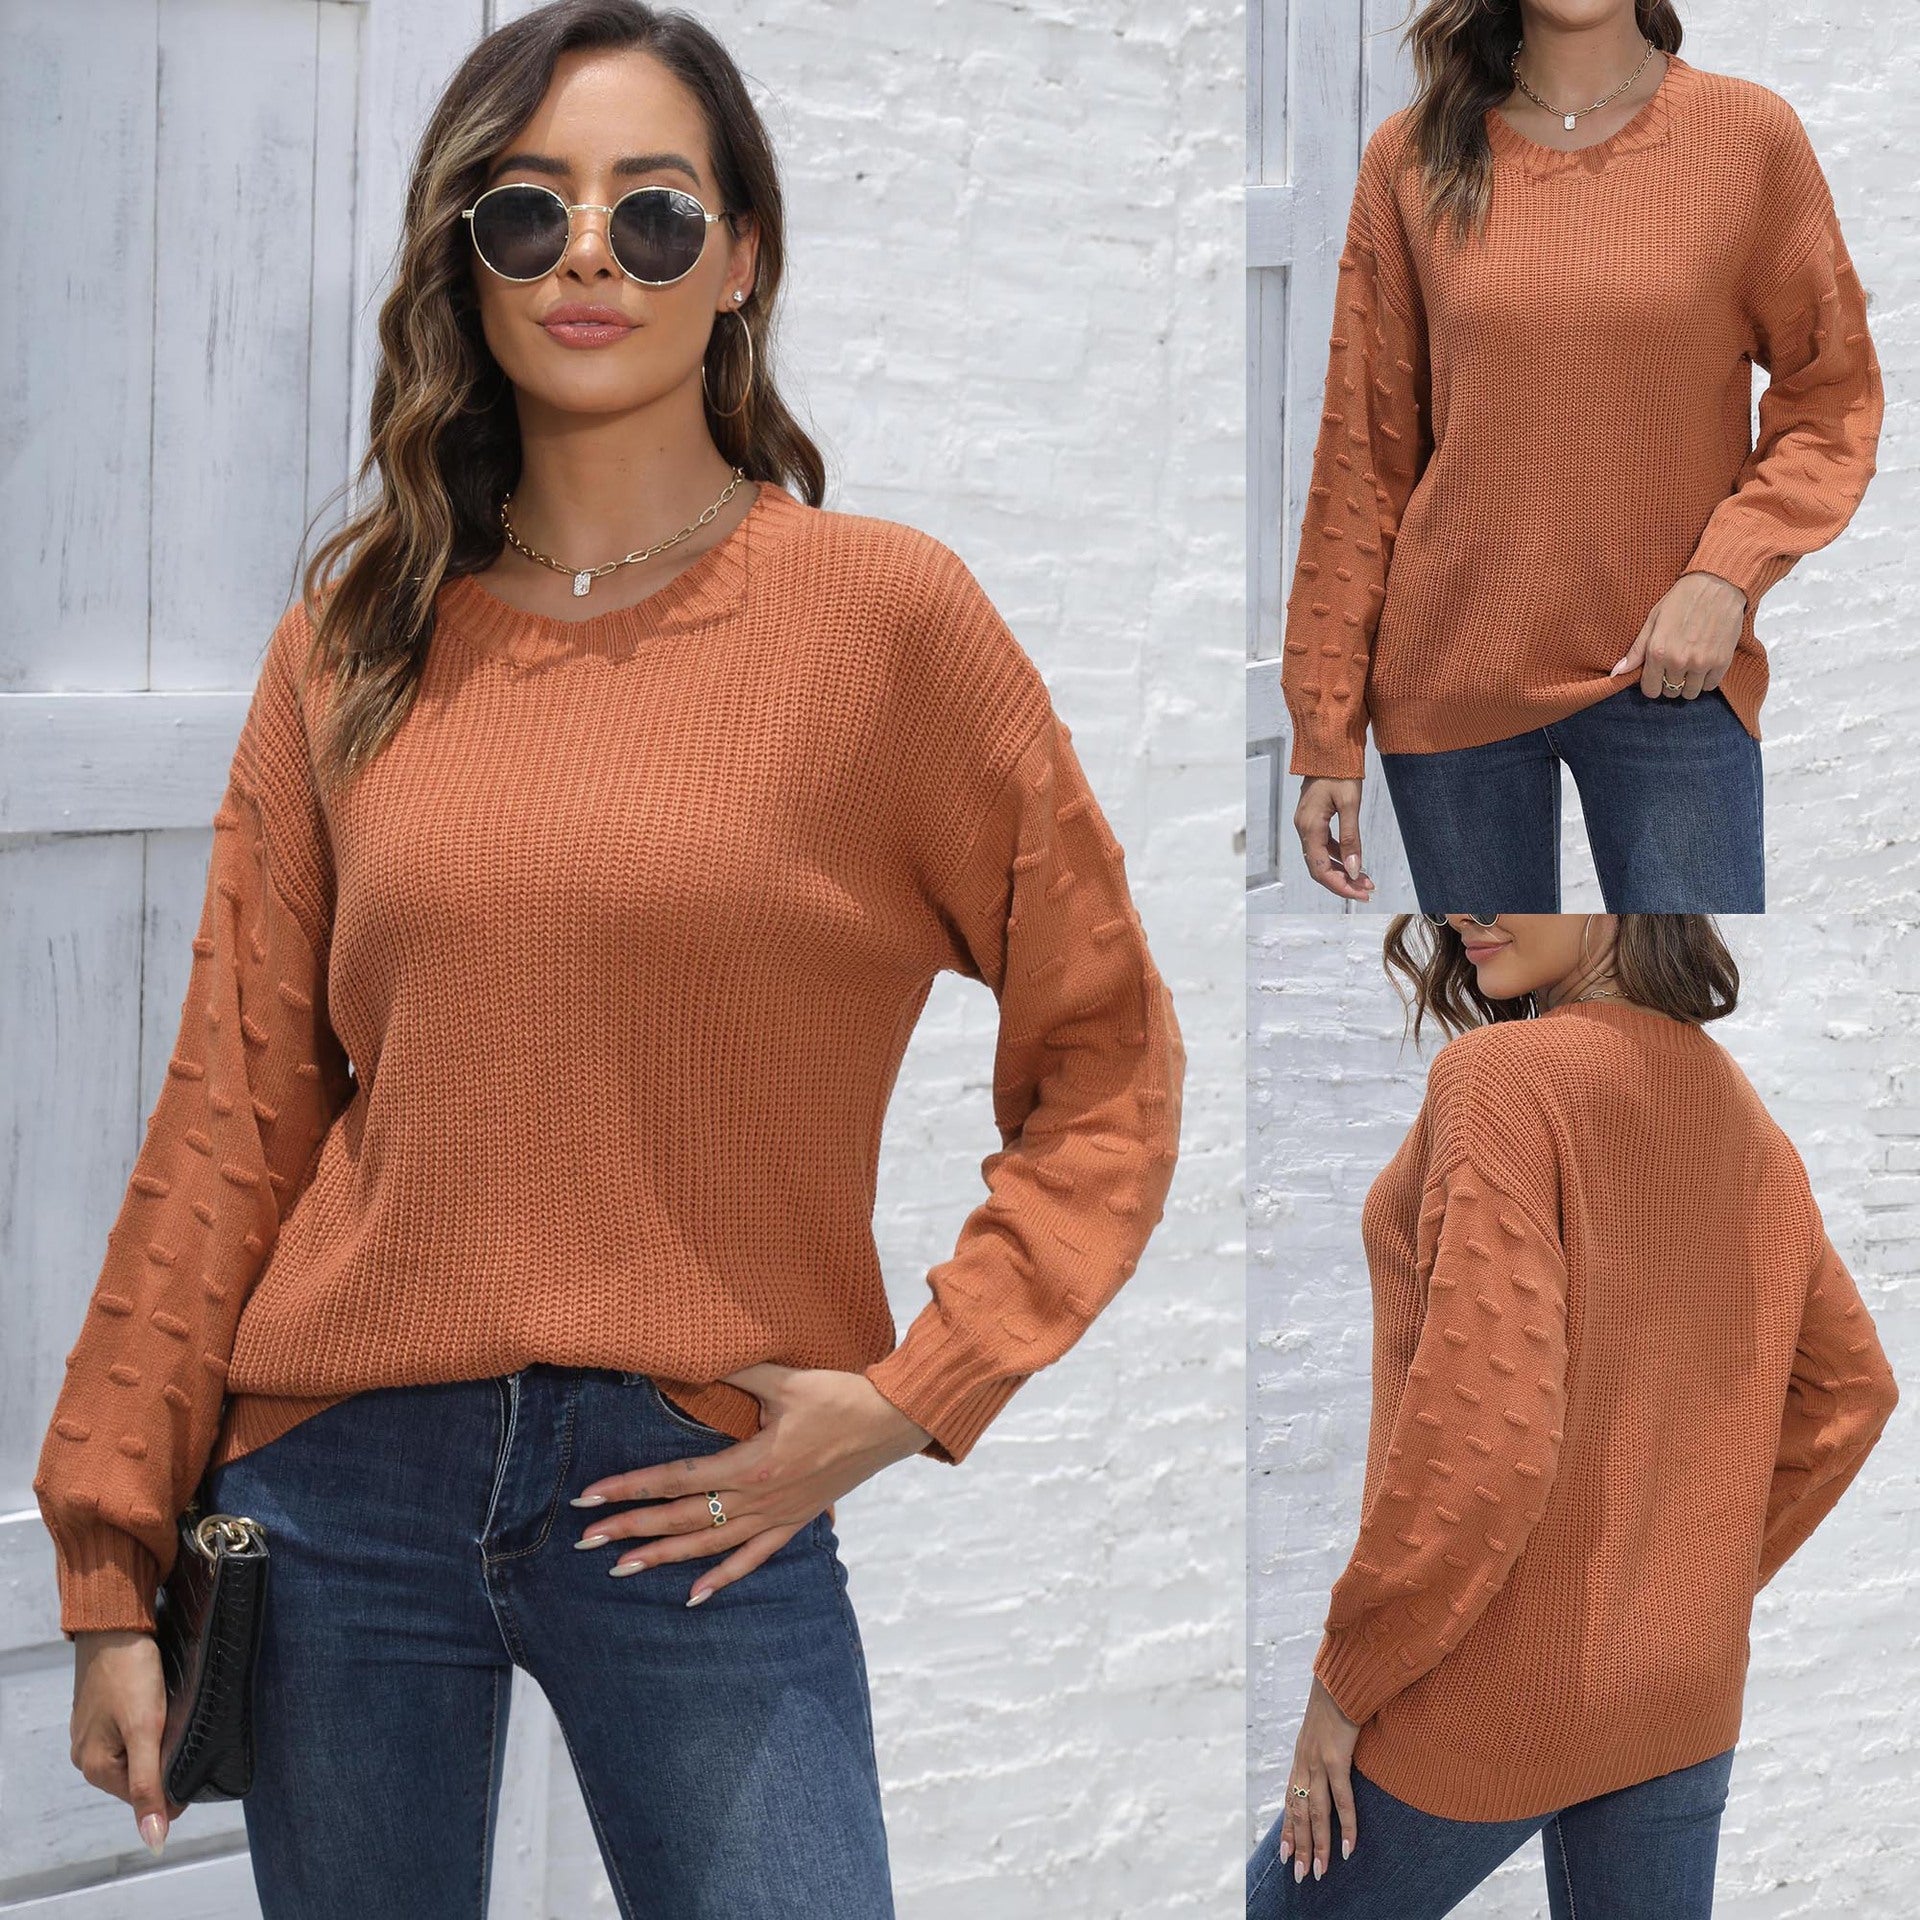 Cozy Up in Style: Women's Pullover Sweater for Autumn & Winter